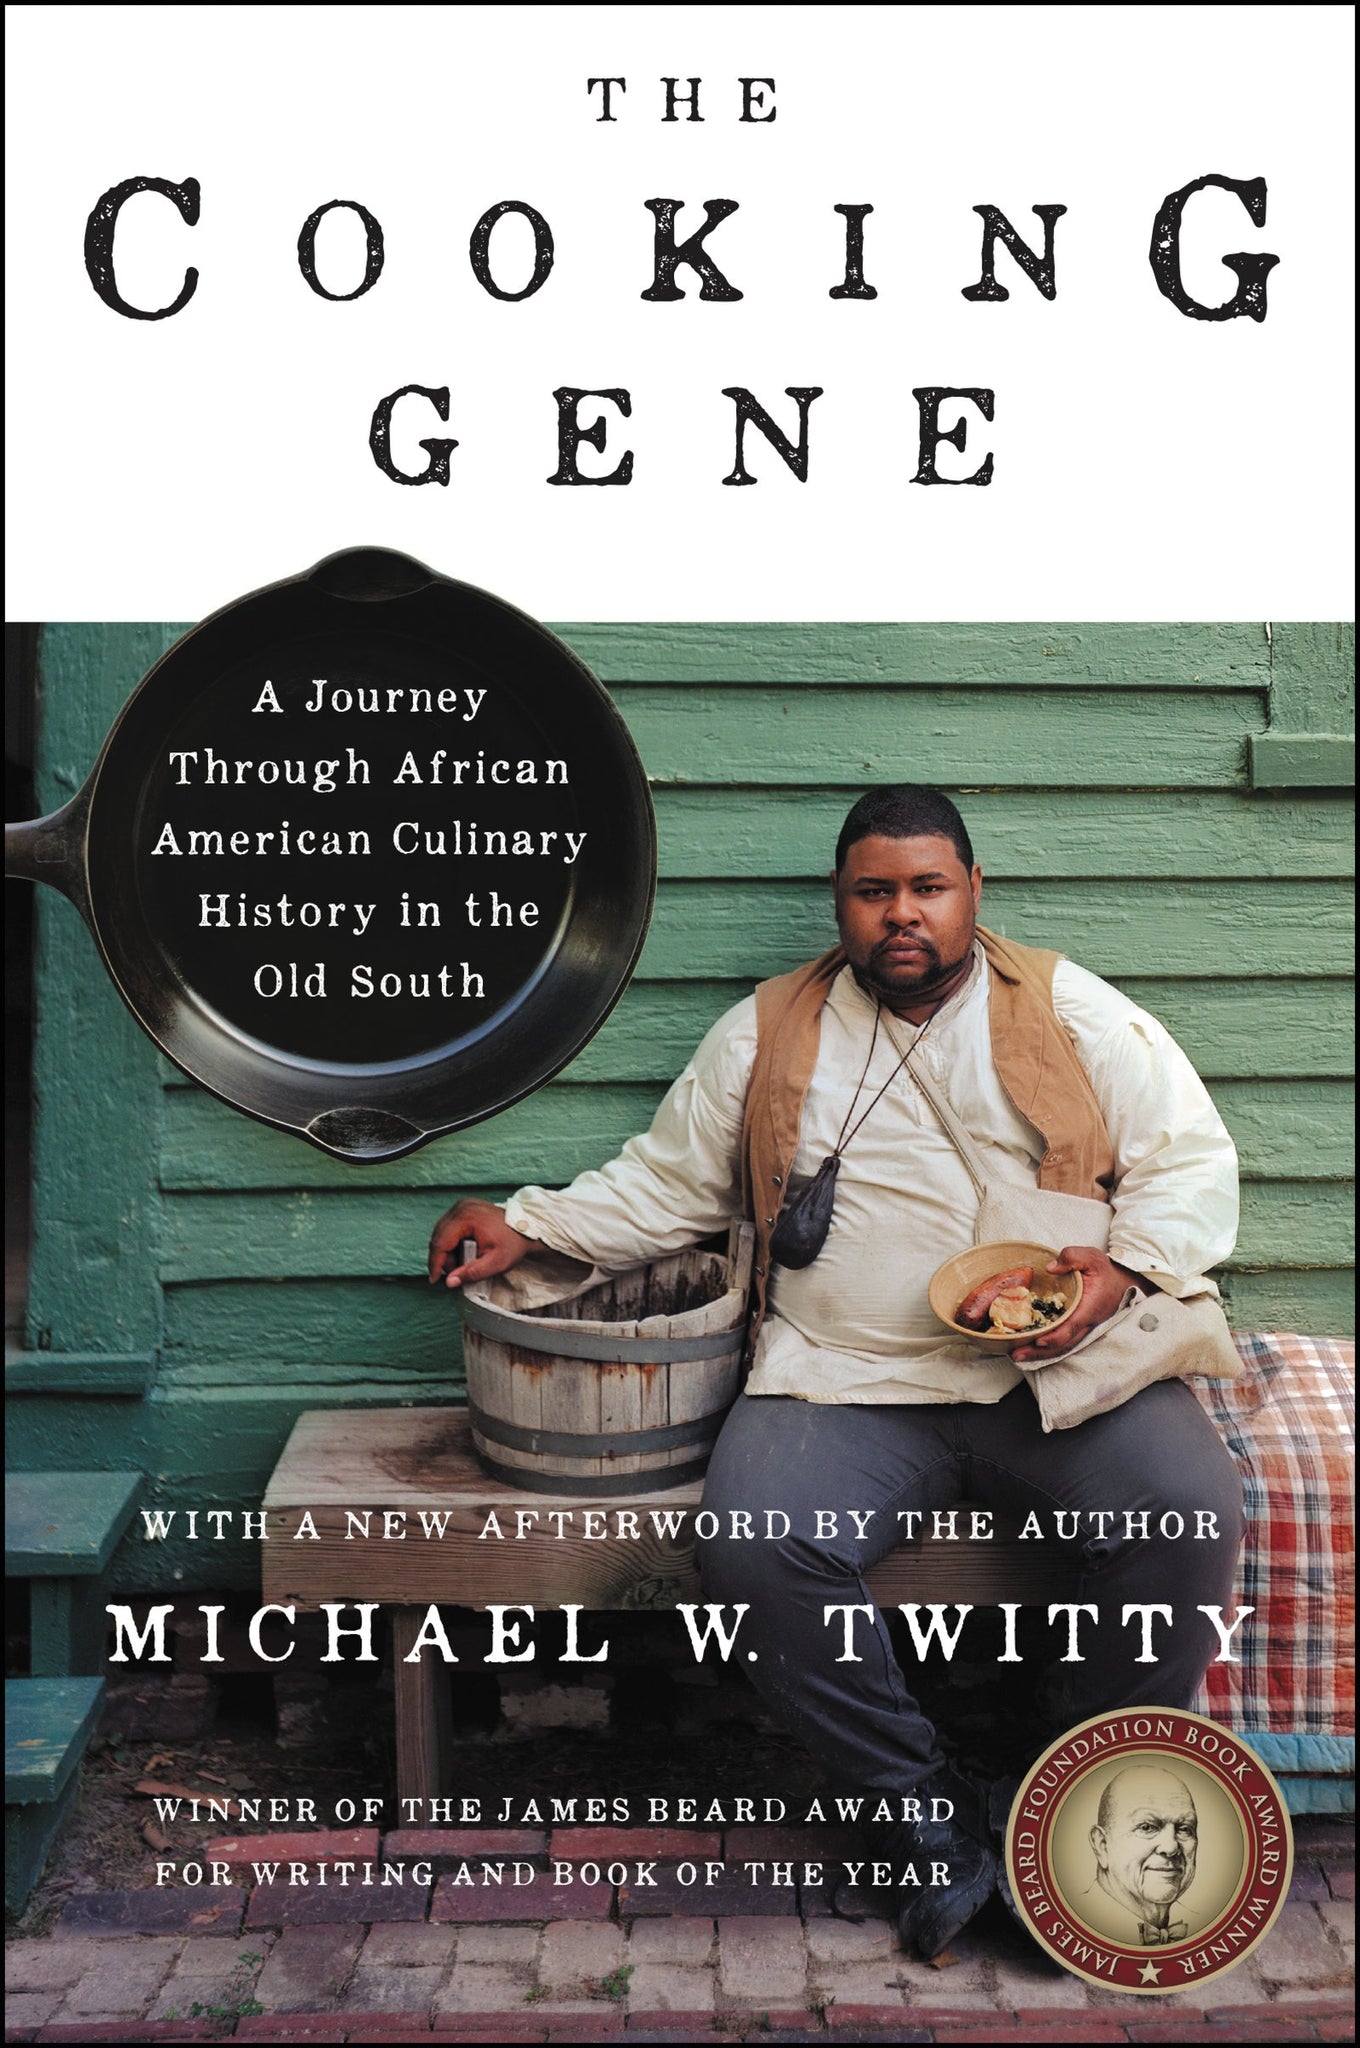 The Cooking Gene: A Journey Through African American Culinary History in the Old South (Hardcover)